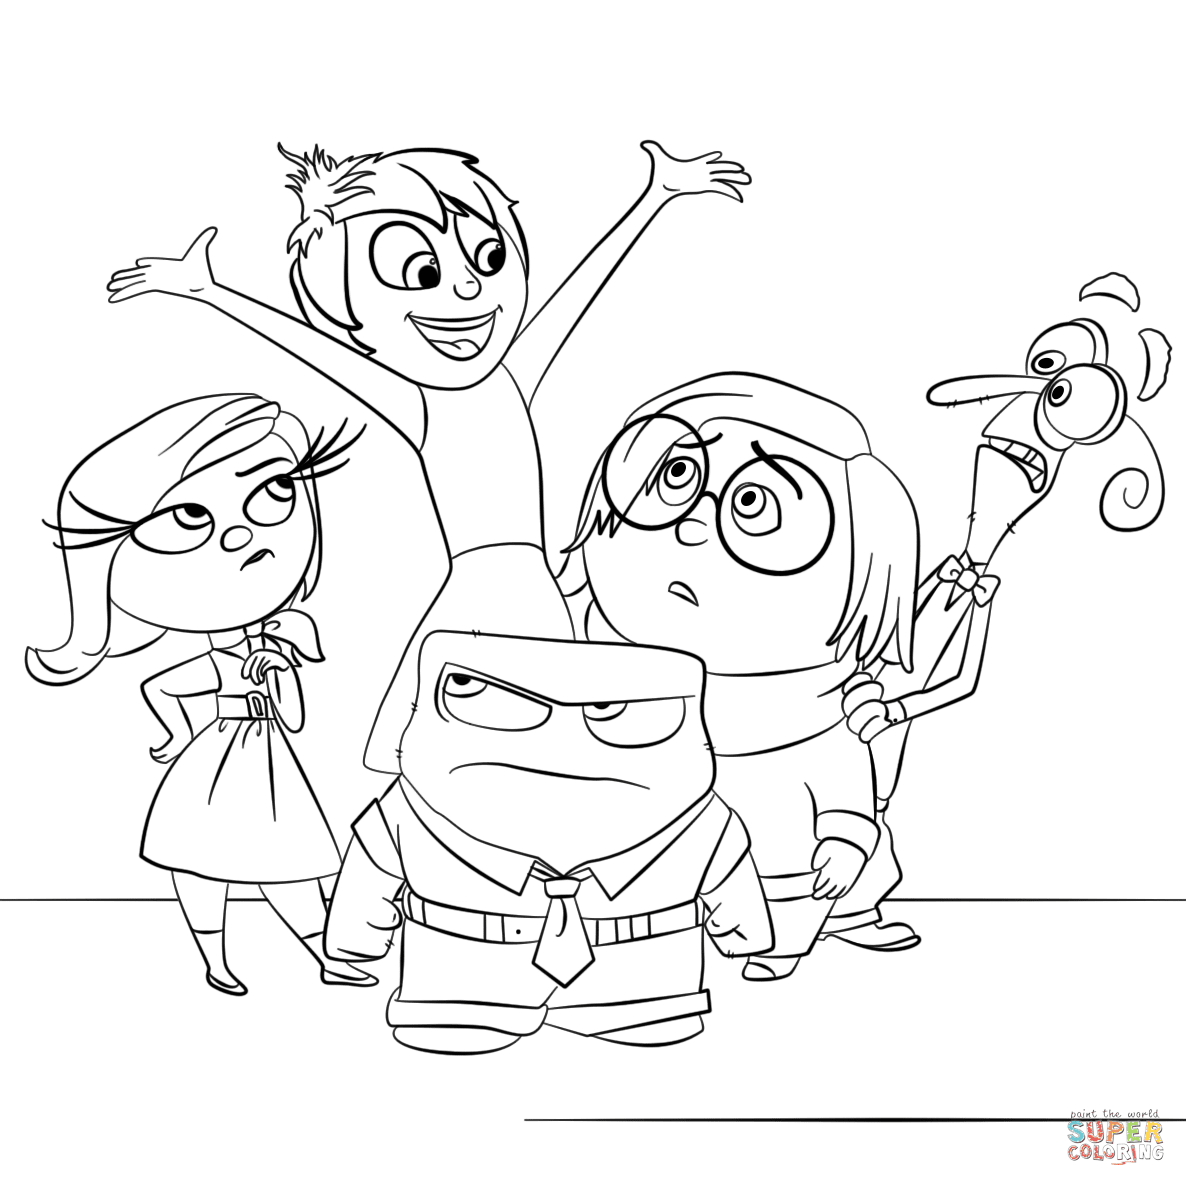 Download Inside Out All Characters coloring page | Free Printable ...